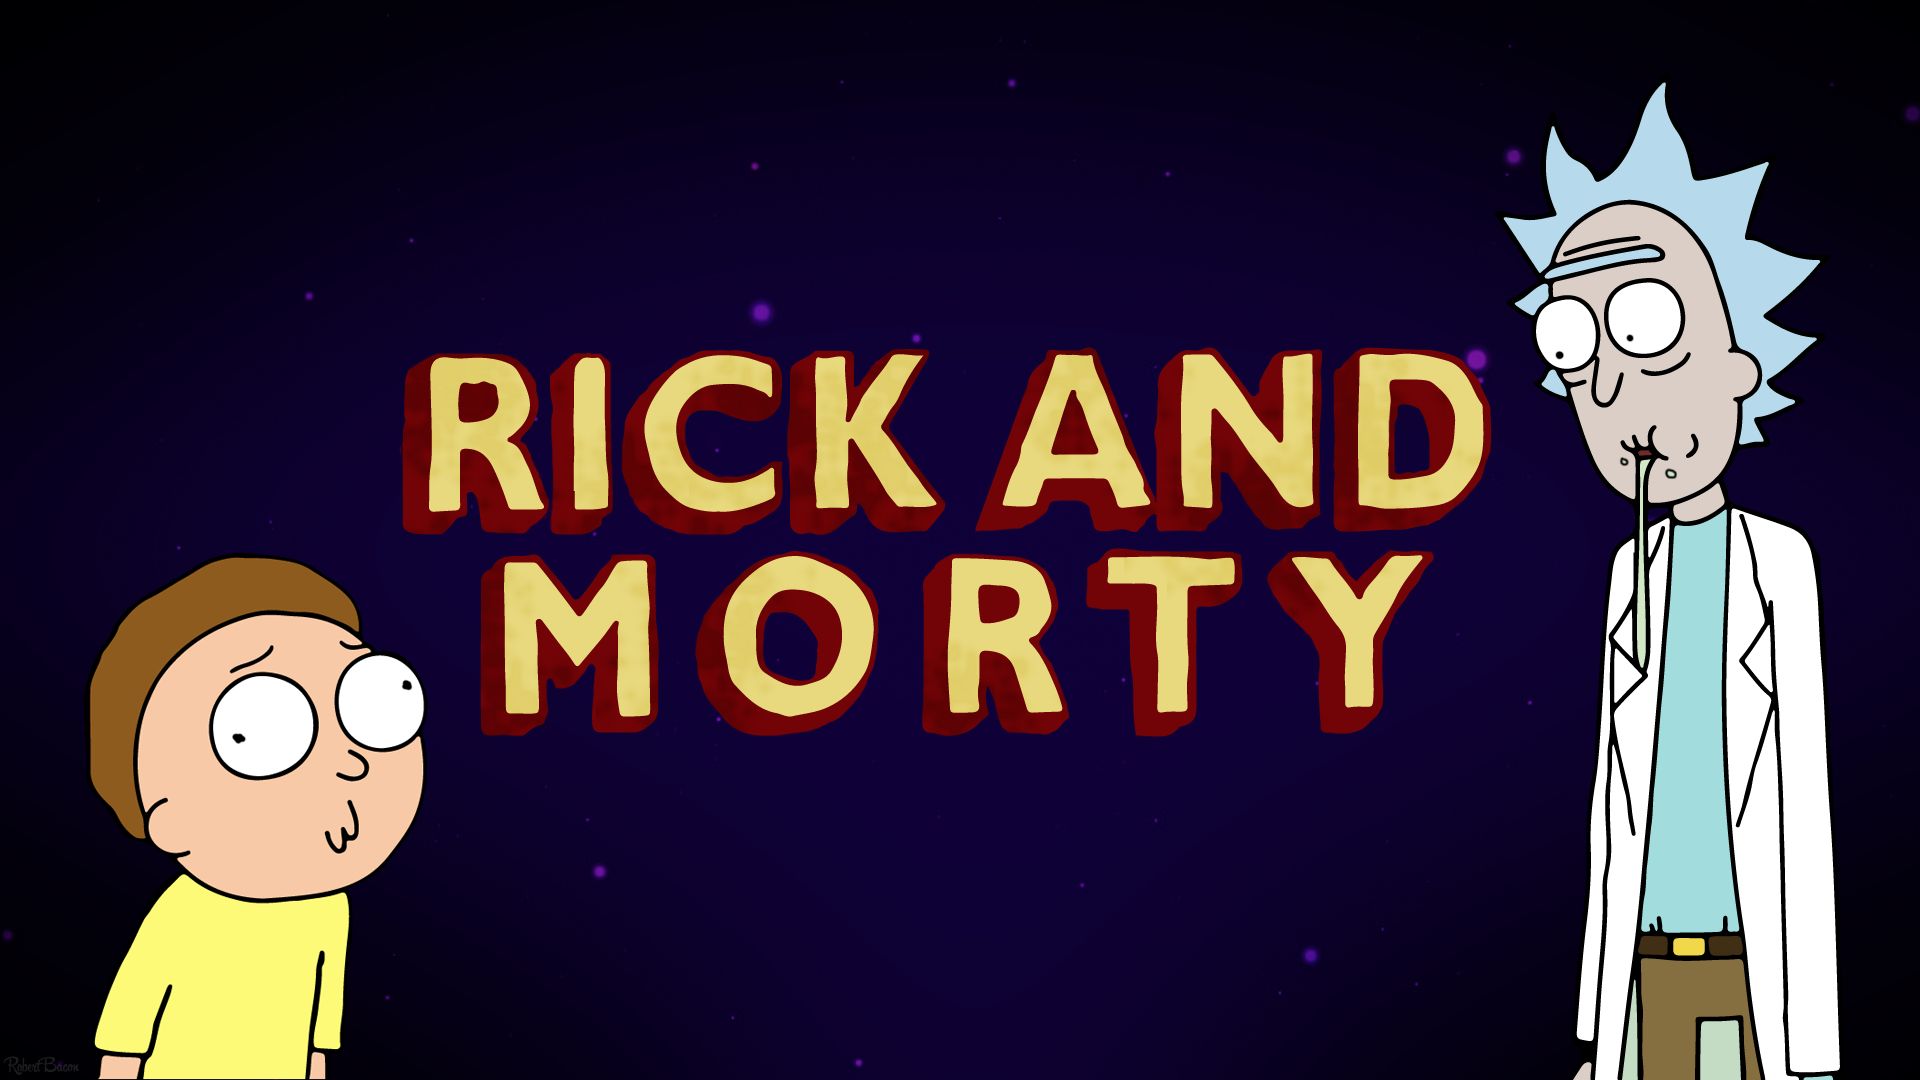 tv show, rick and morty, morty smith, rick sanchez phone background